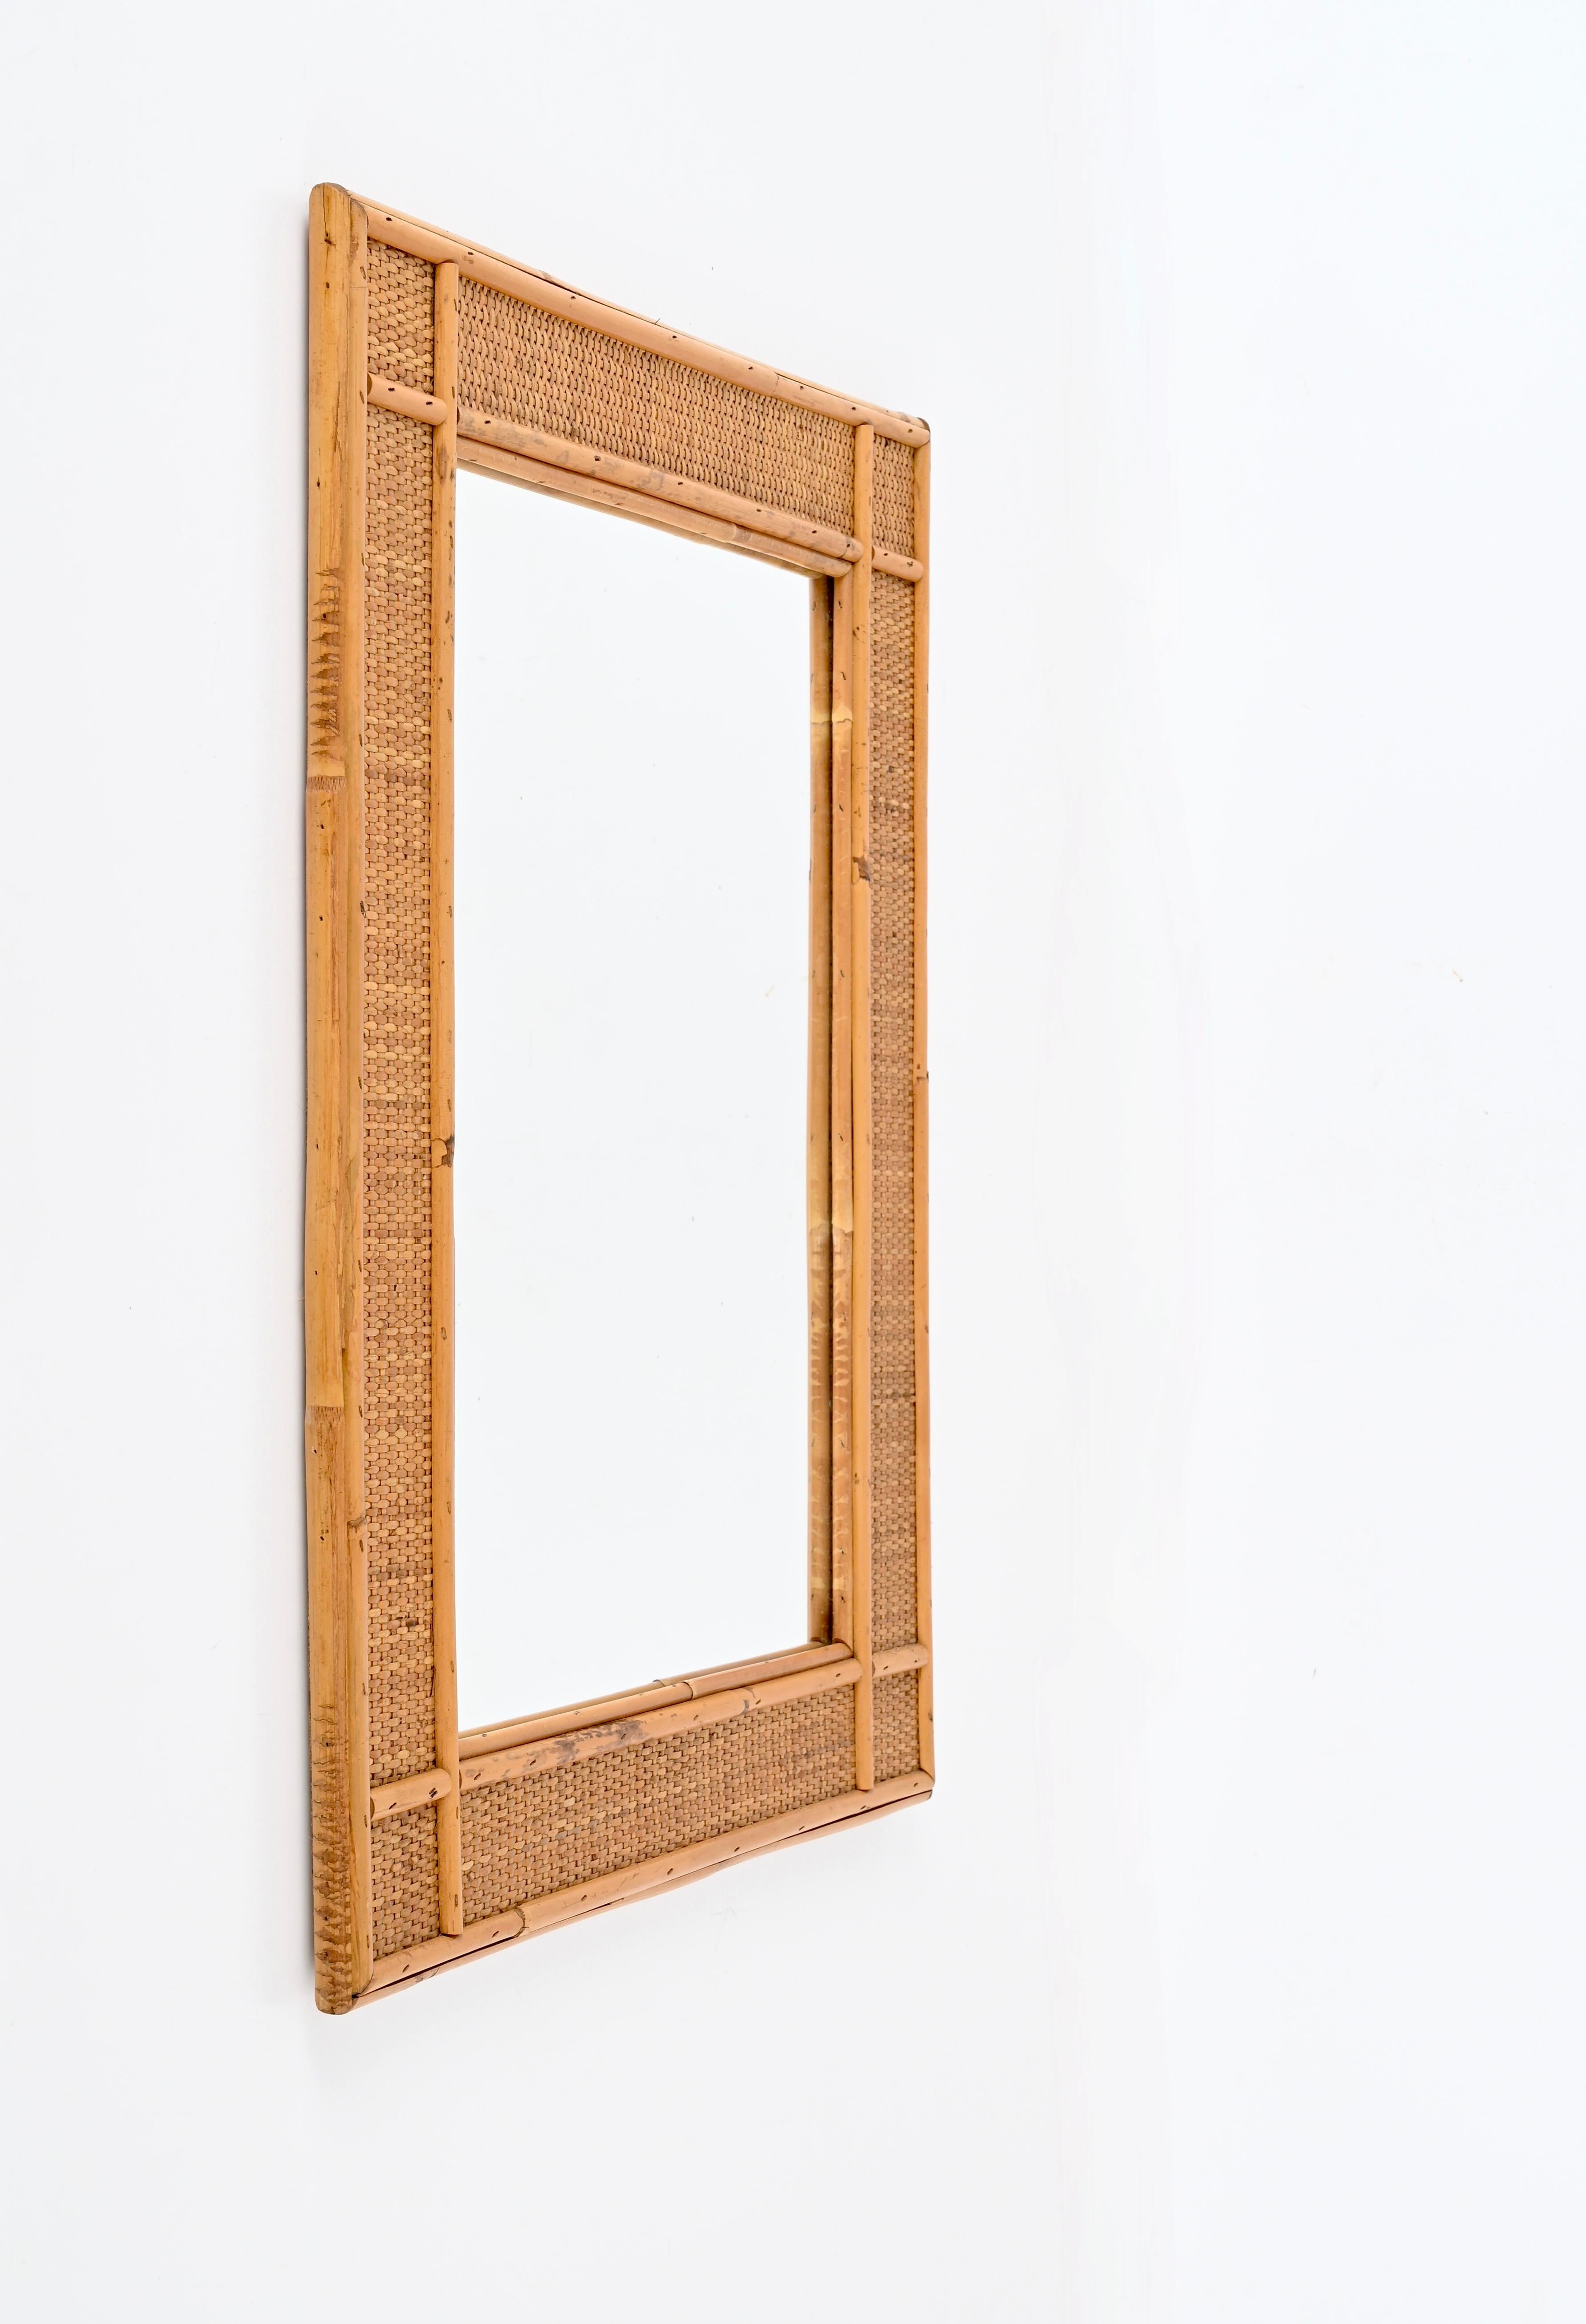 Hand-Crafted Midcentury Rectangular  Bamboo and Woven Rattan Wicker Mirror, Italy 1970s For Sale